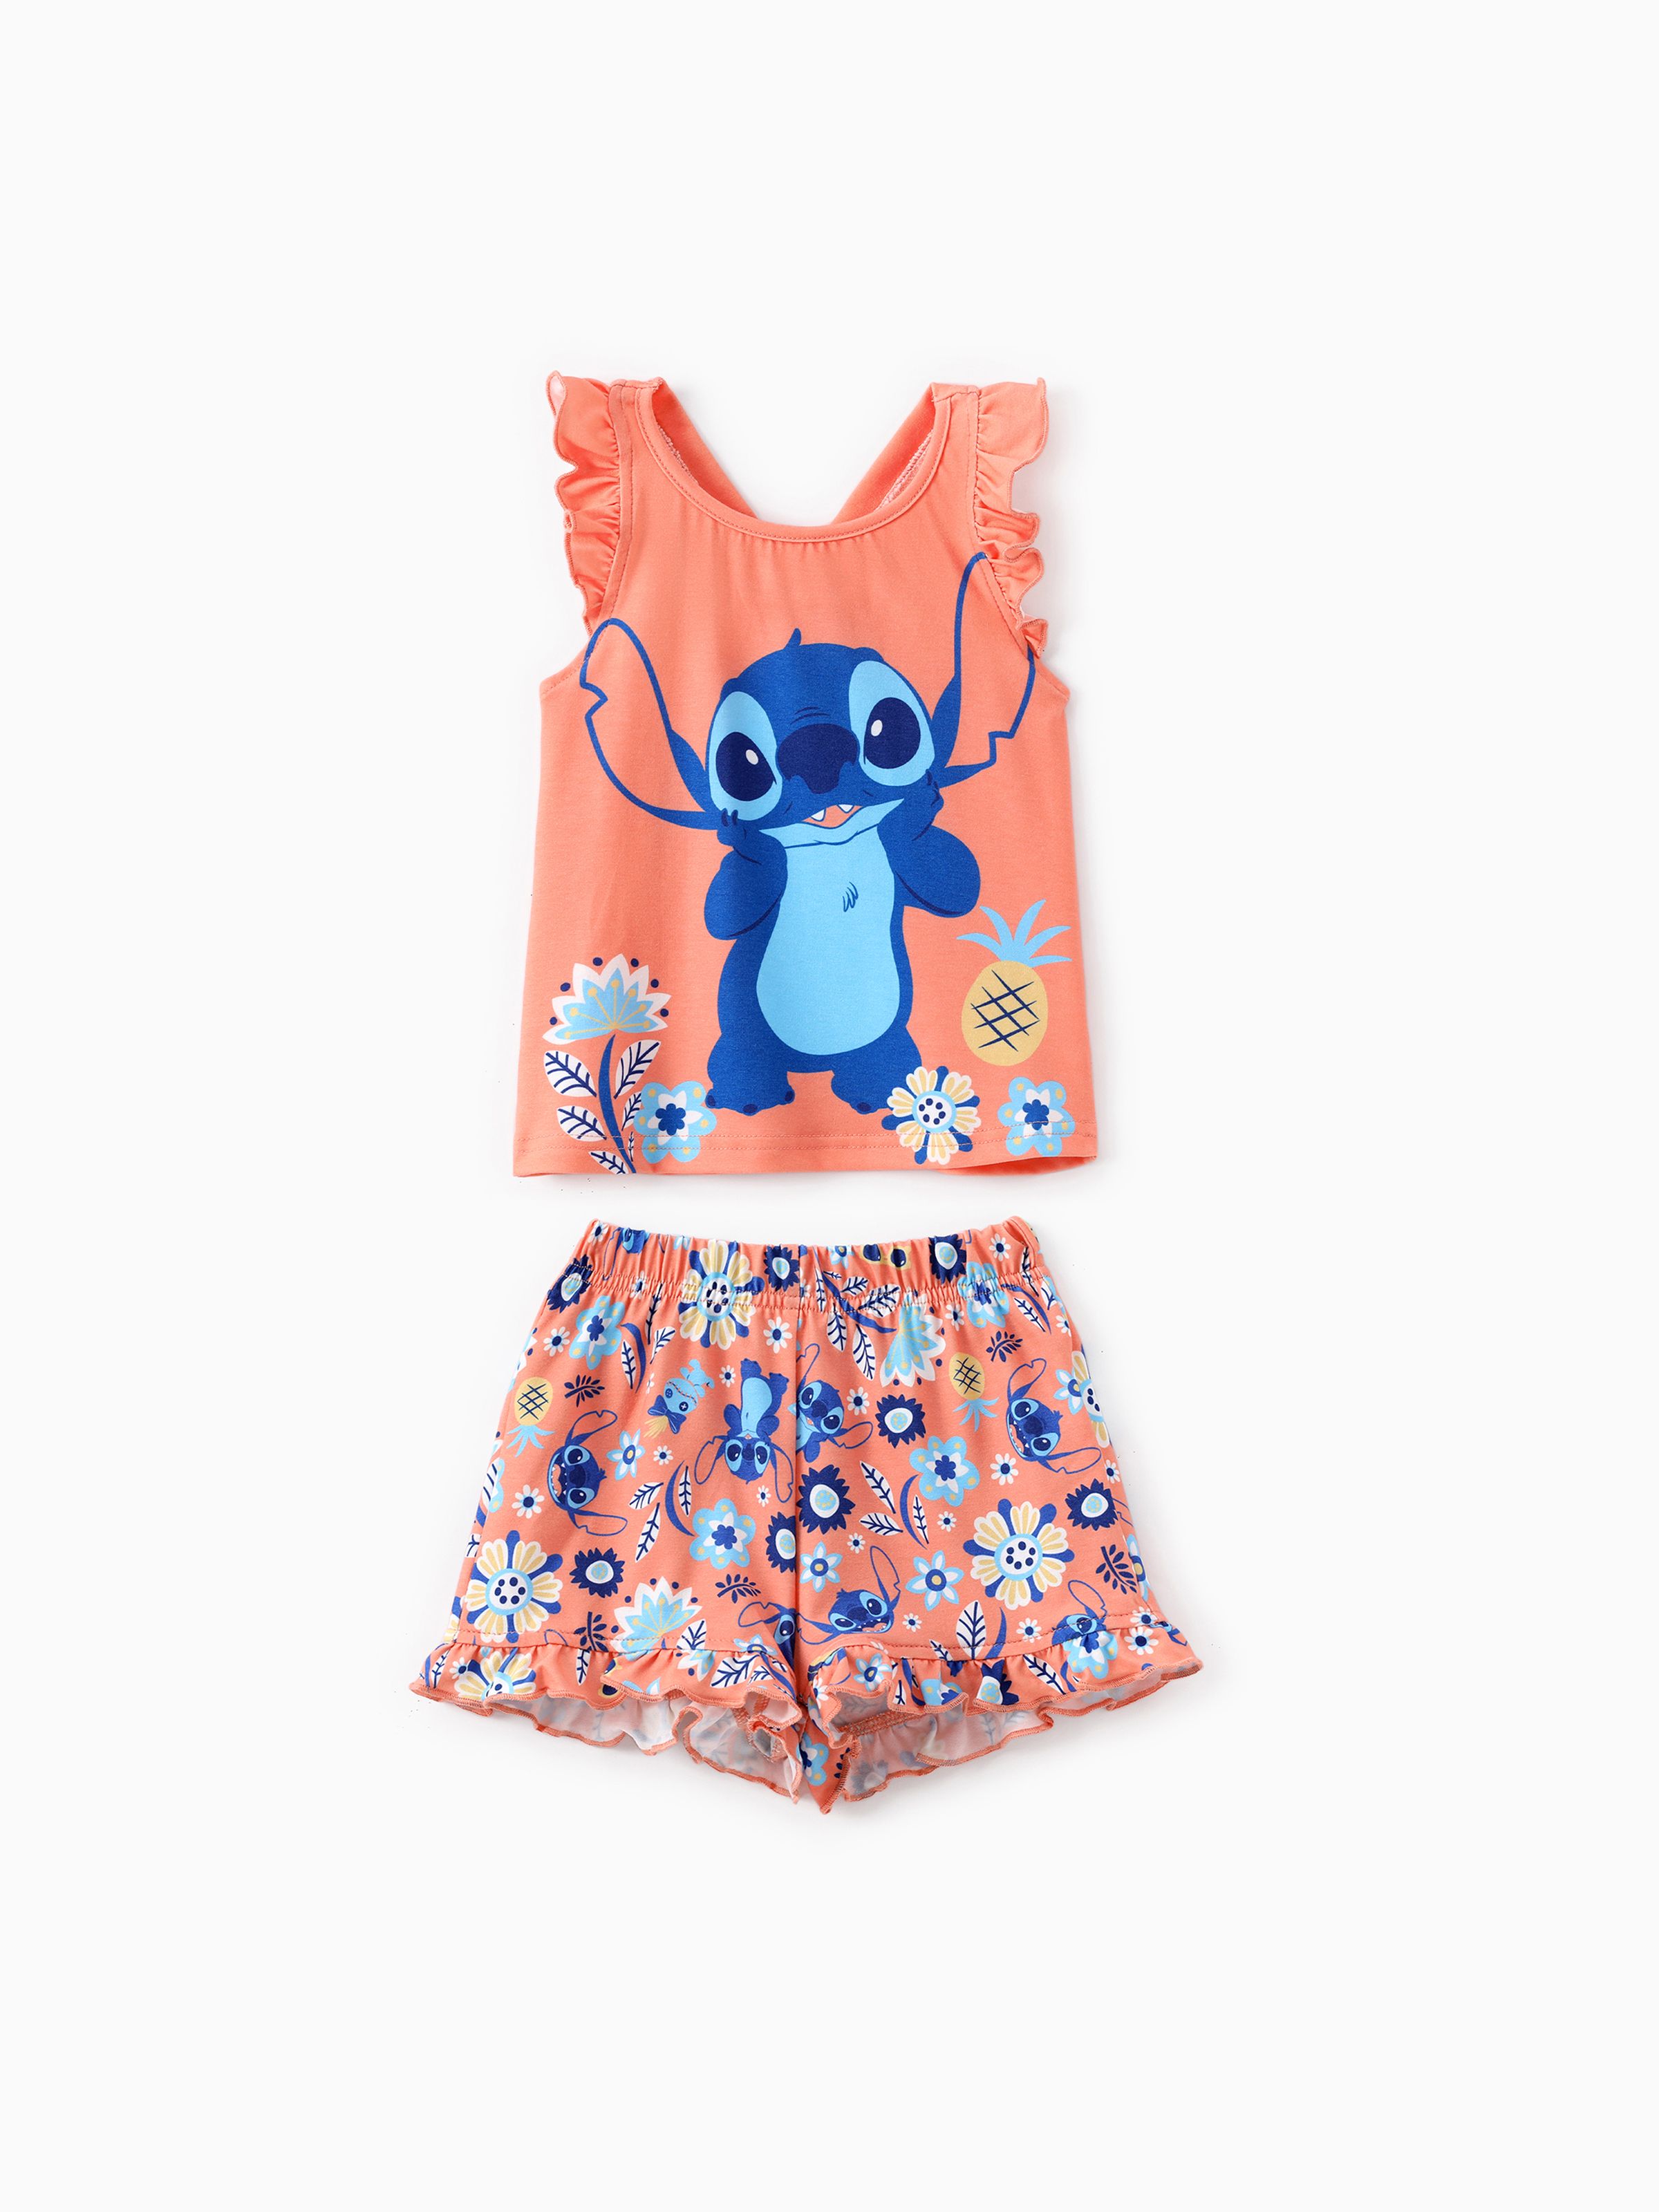 

Disney Stitch Toddler Girls 2pcs Naia™ Character Floral Ruffle tank top with Plant Tropical Flower Print Shorts Set